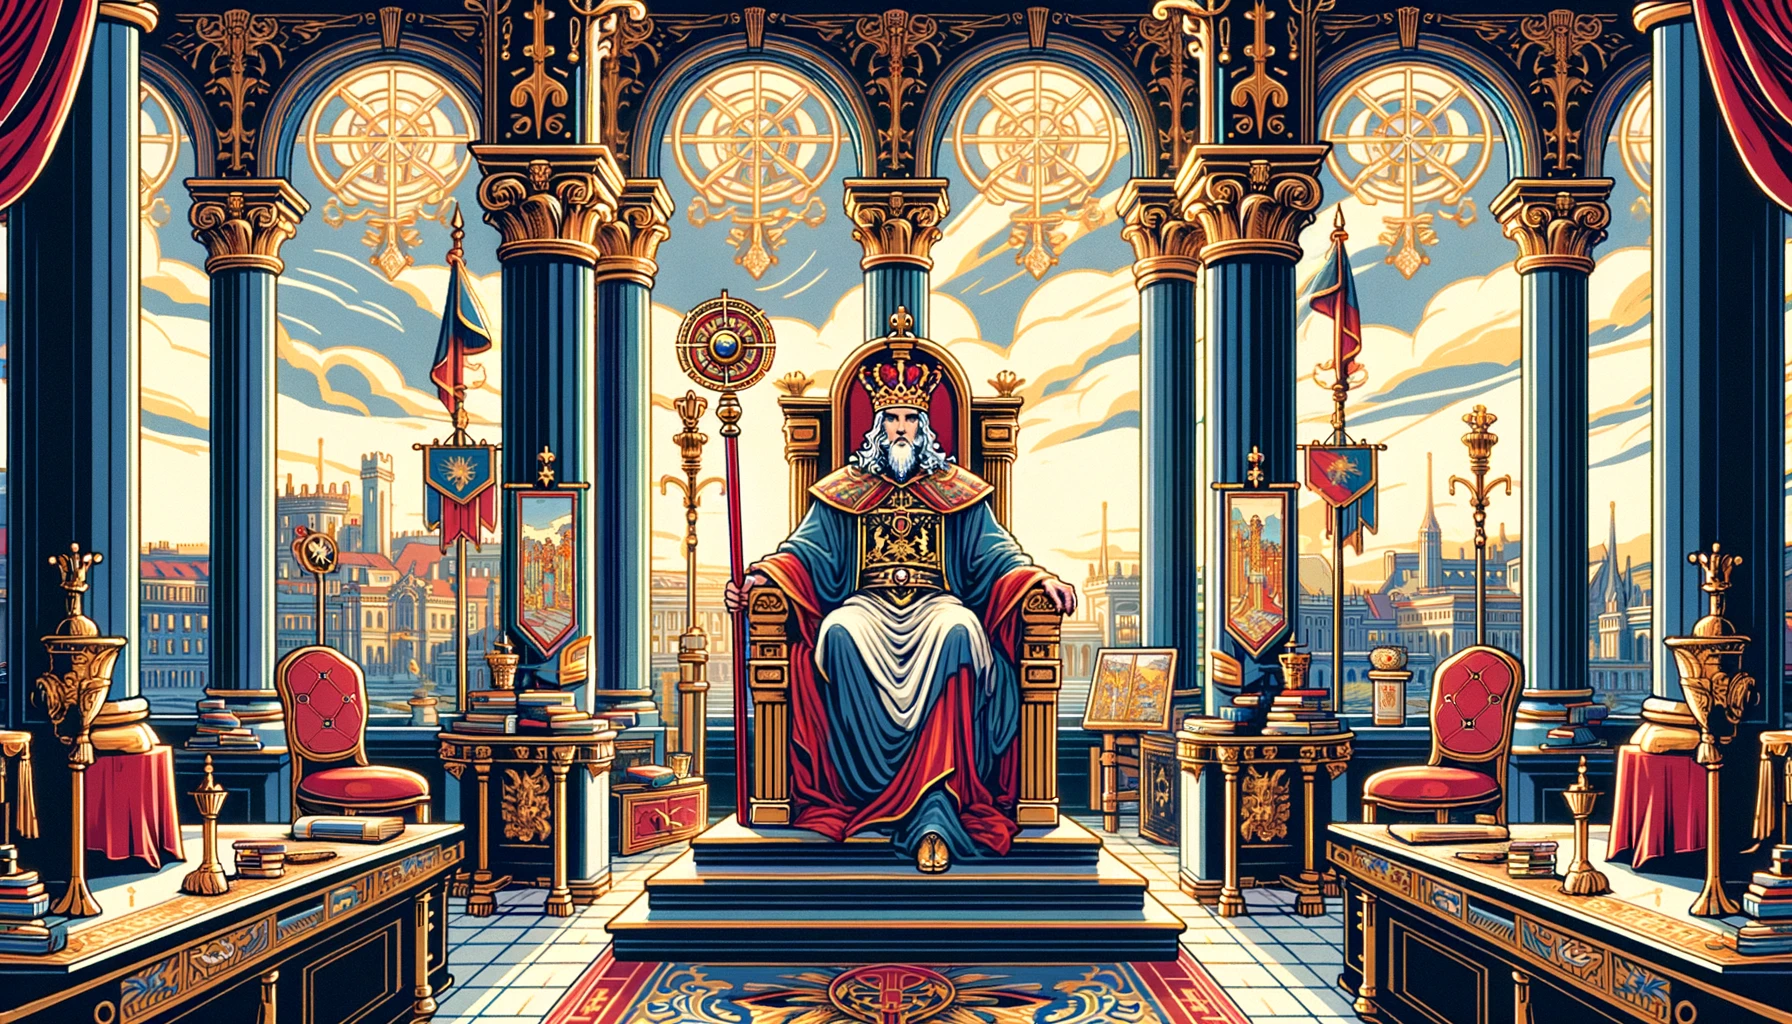 "A depiction of leadership and governance with a solid throne and scepter, set in a stable and secure environment, emphasizing the power and confidence associated with The Emperor card."